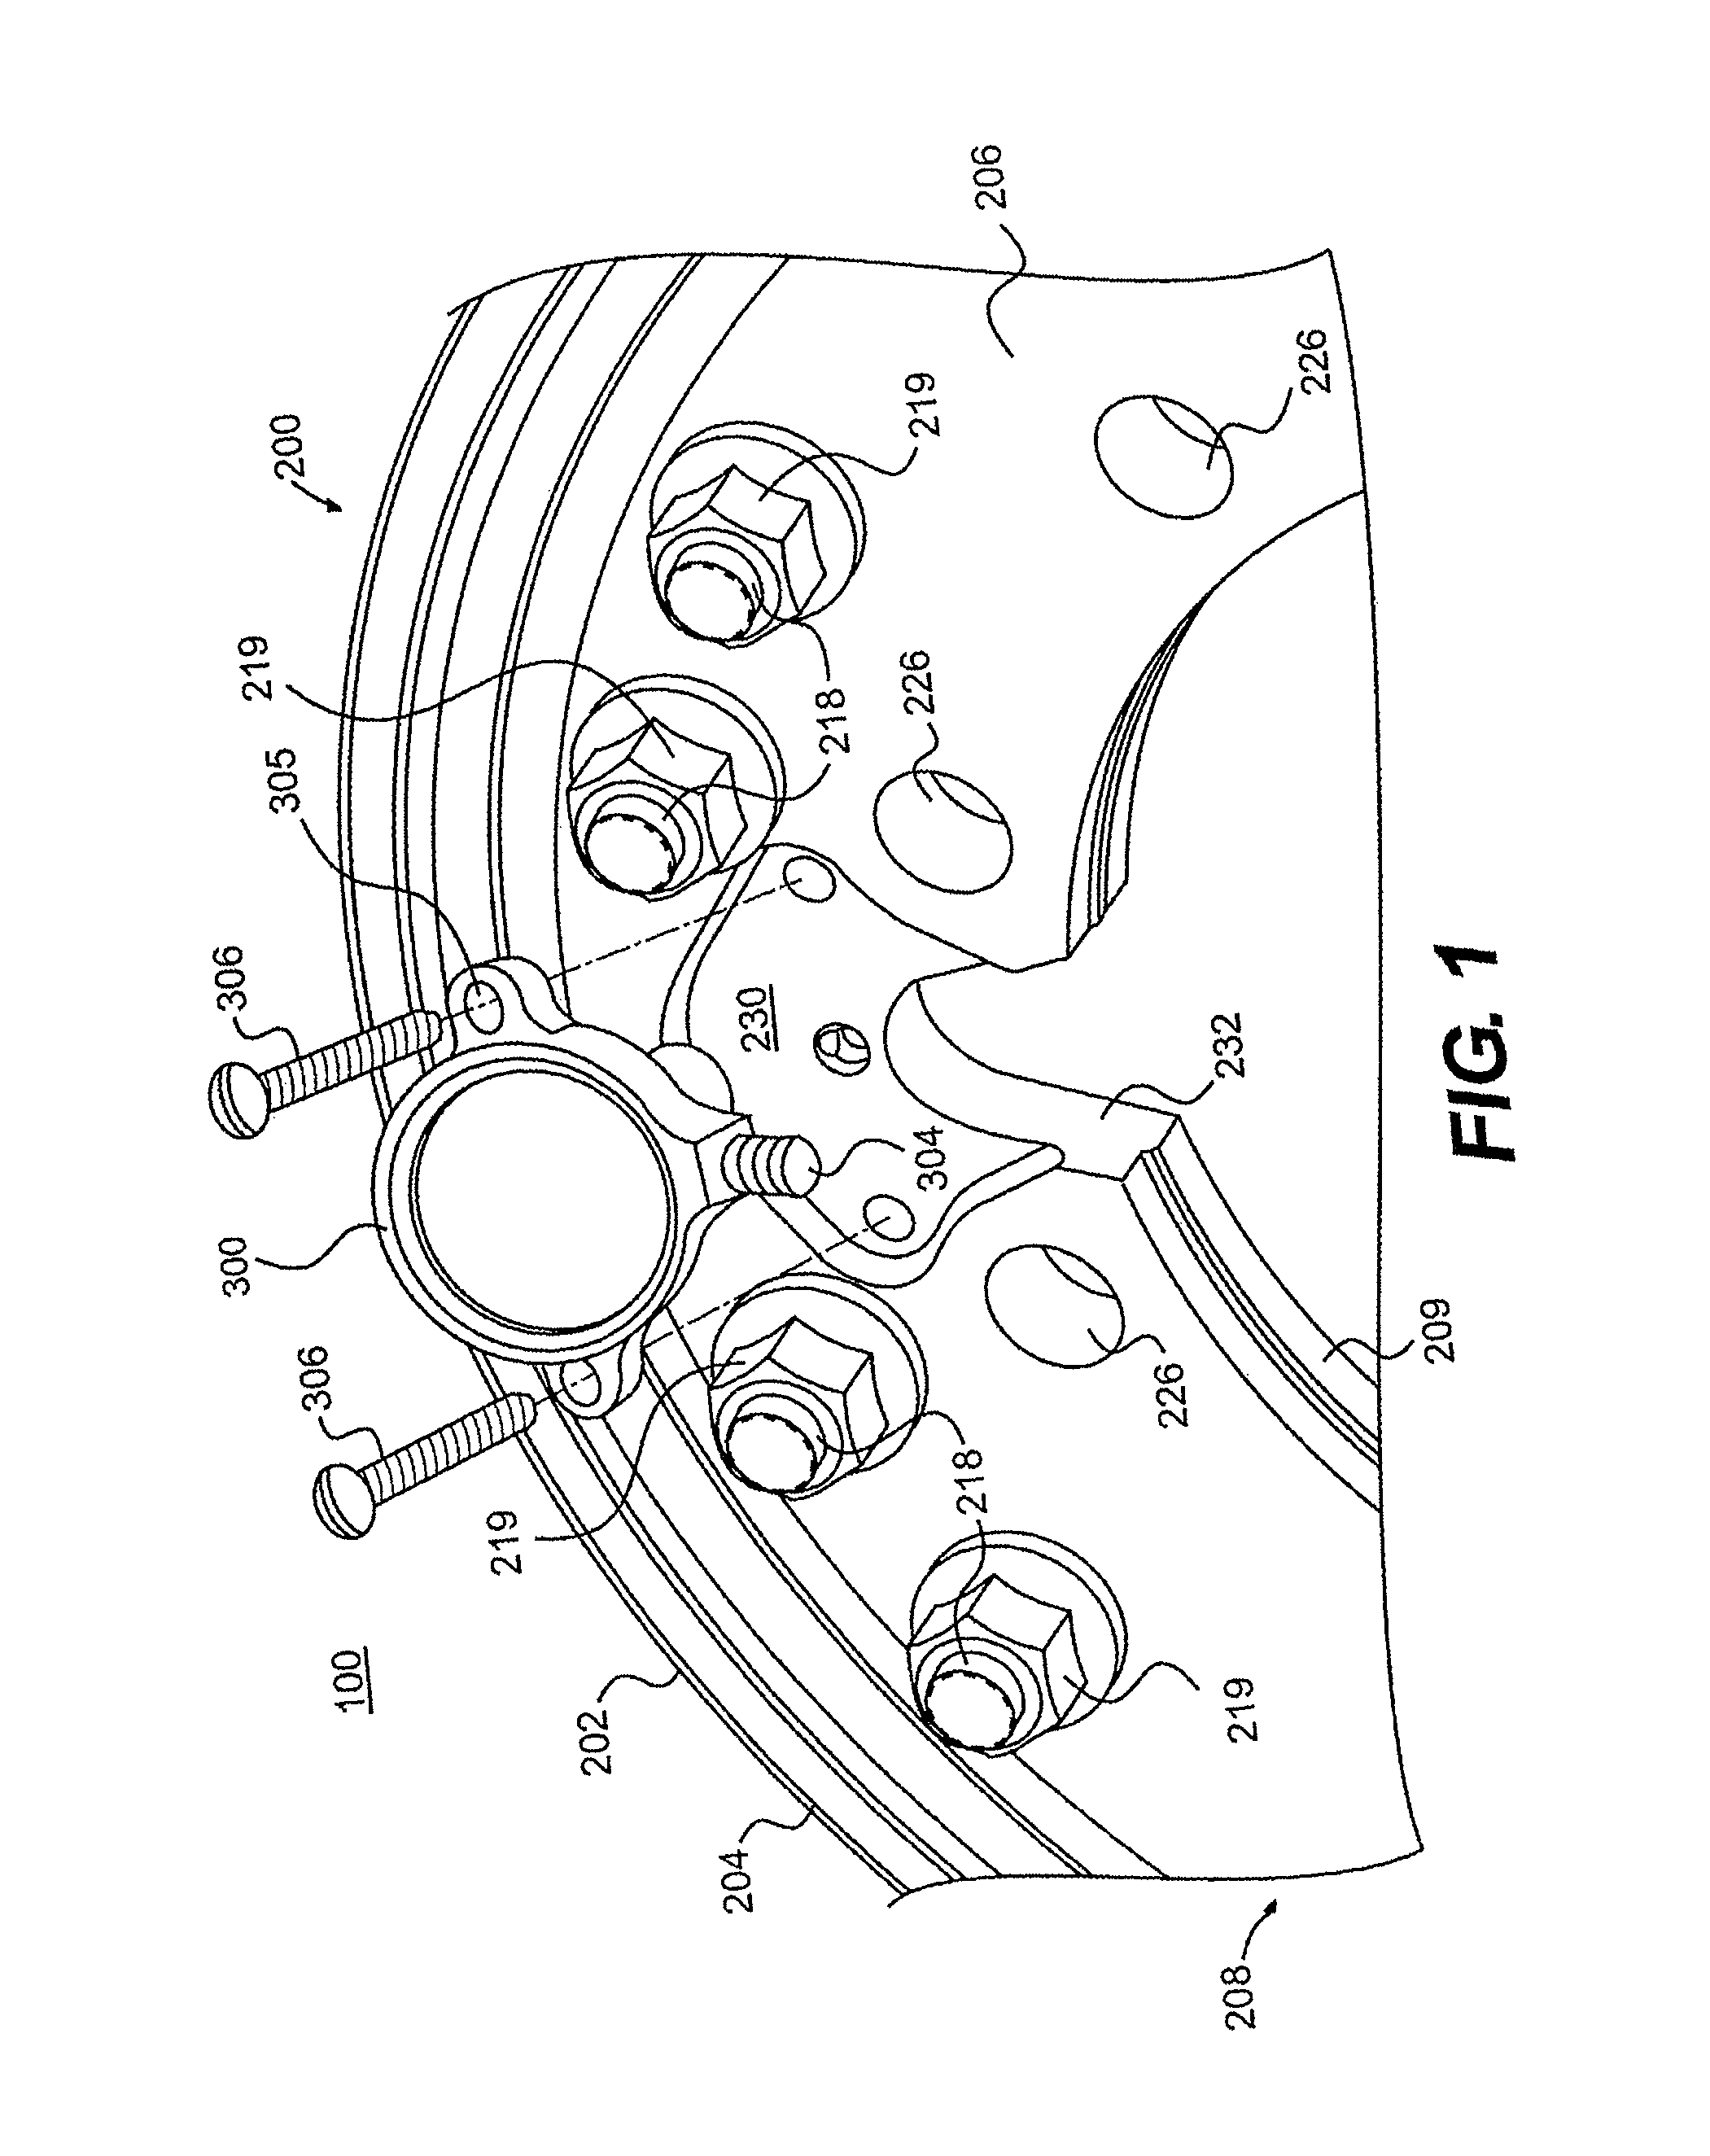 Vehicle wheel assemblies and valves for use with a central tire inflation system